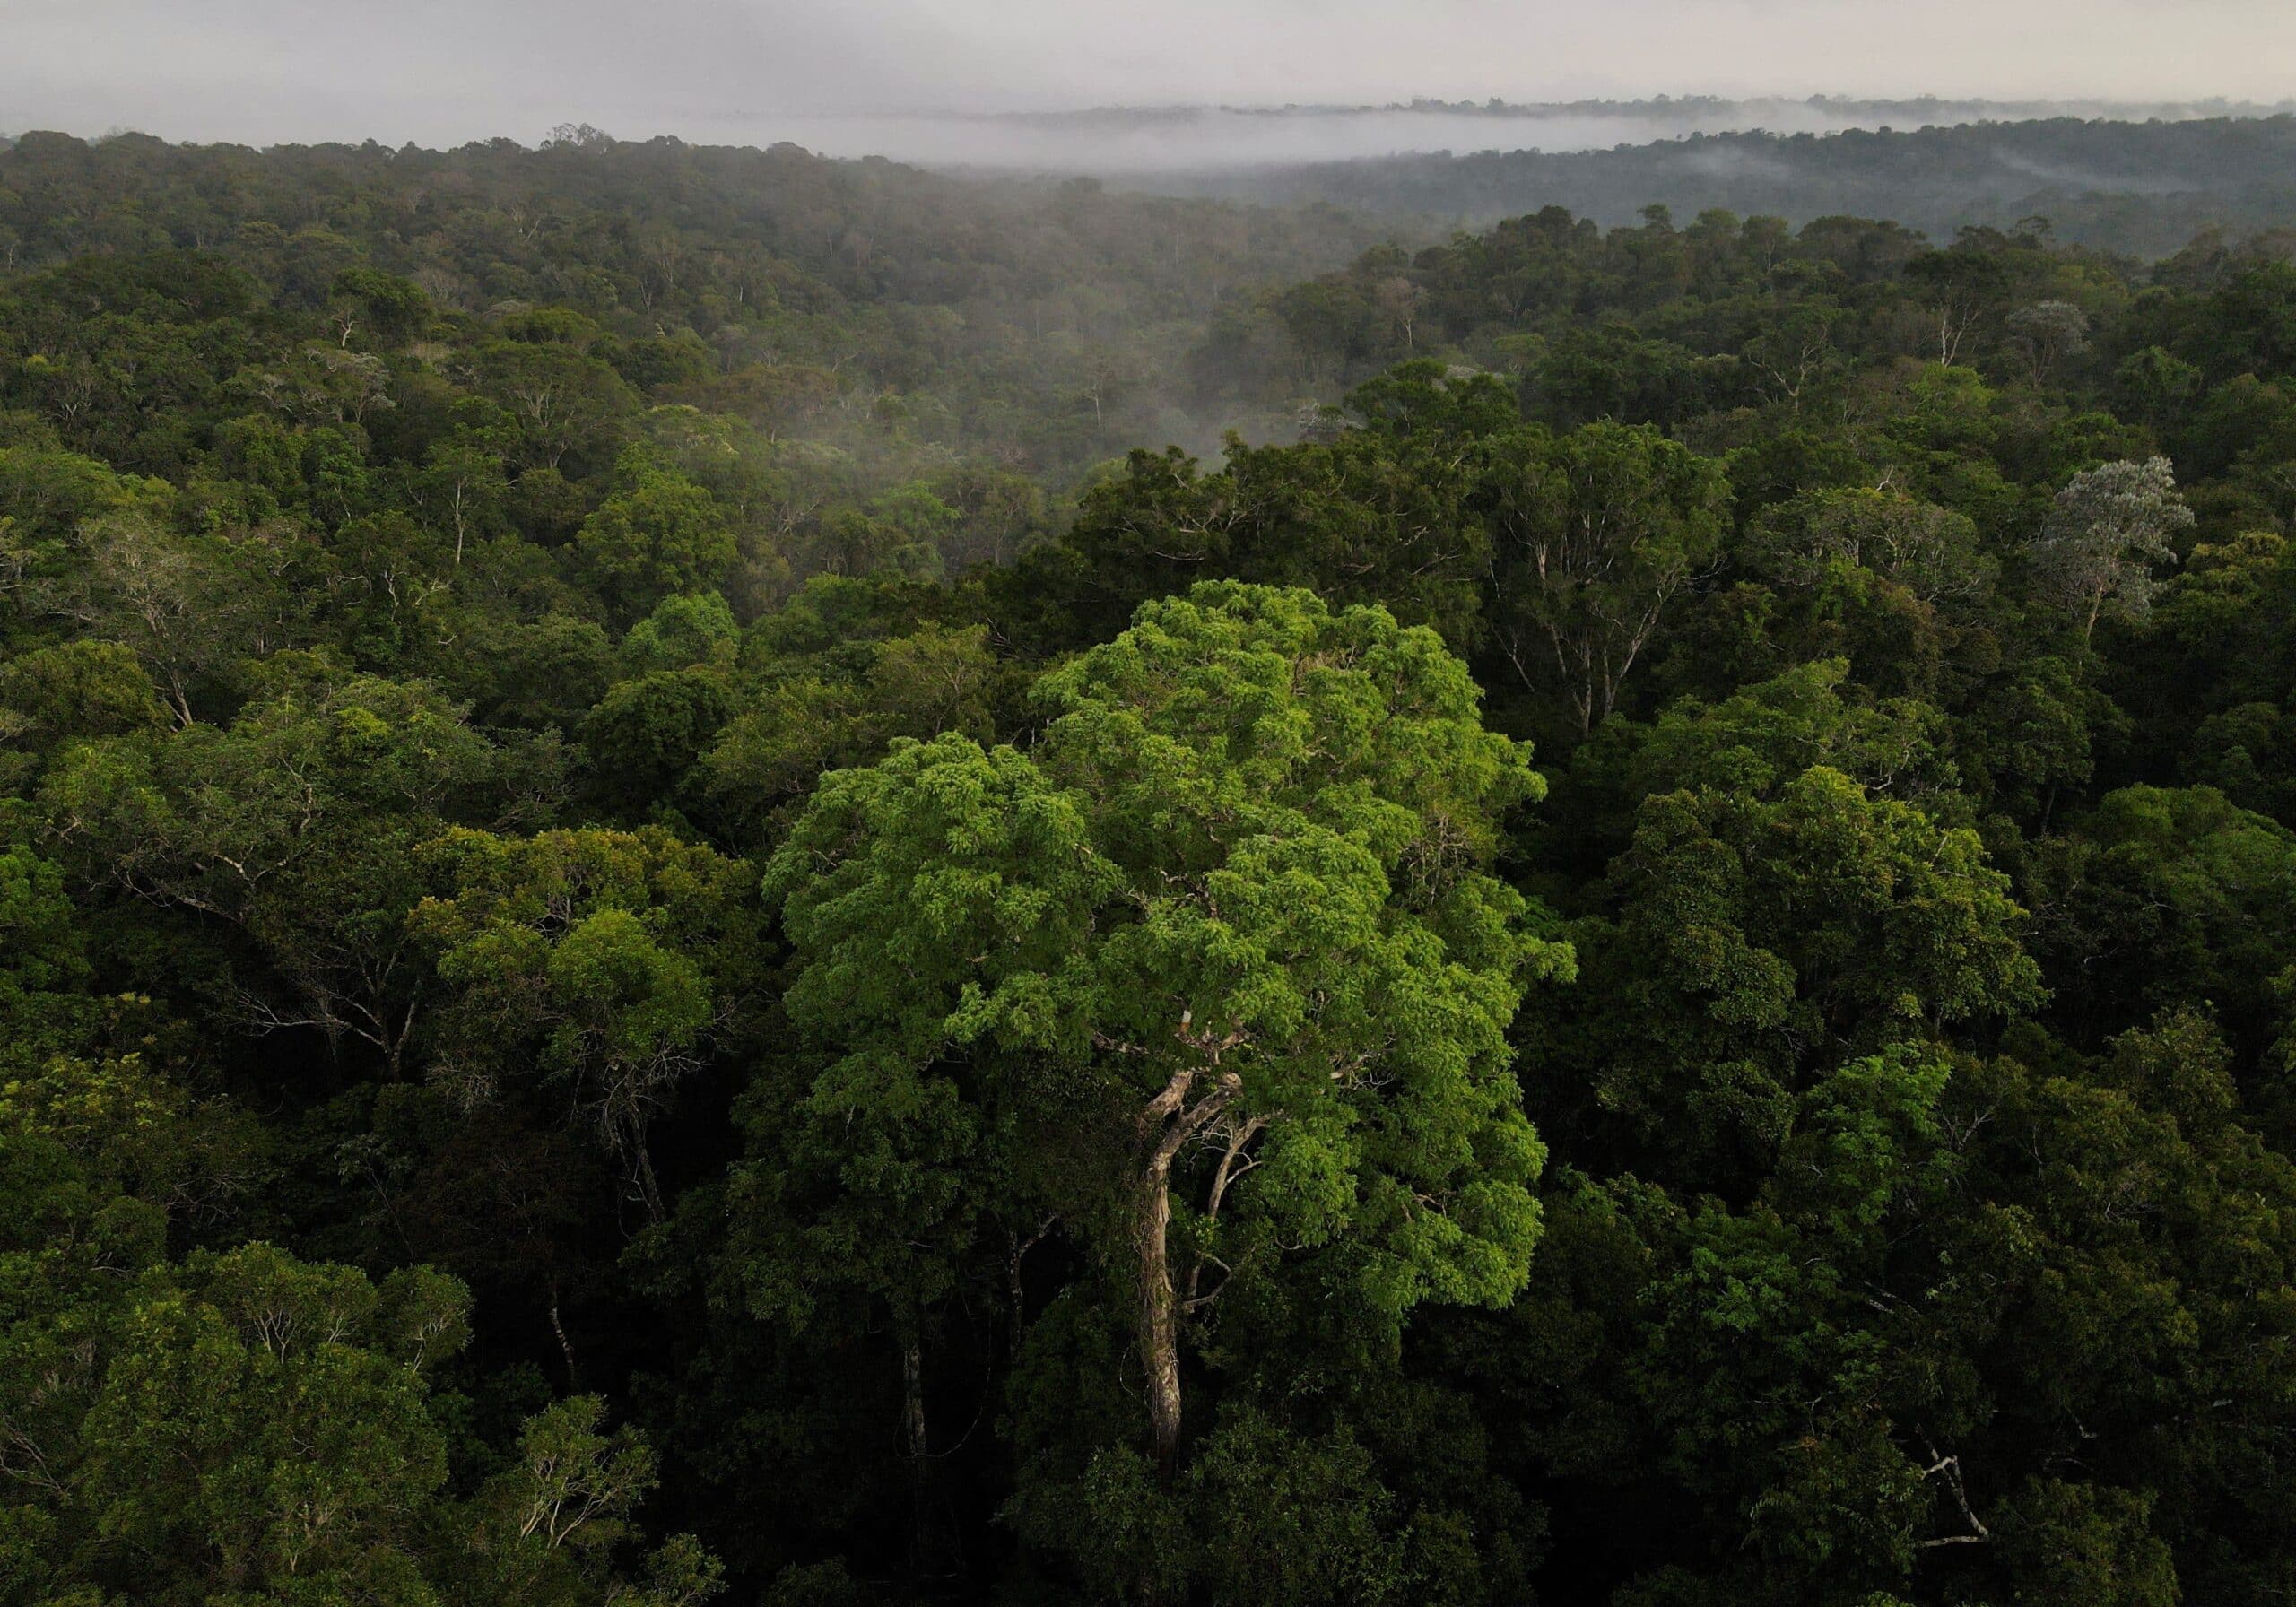 An aerial view shows trees as the sun rises at the Amazon rainforest in Manaus in Brazil's Amazonas state Oct. 26, 2022. (OSV News photo/Bruno Kelly, Reuters)